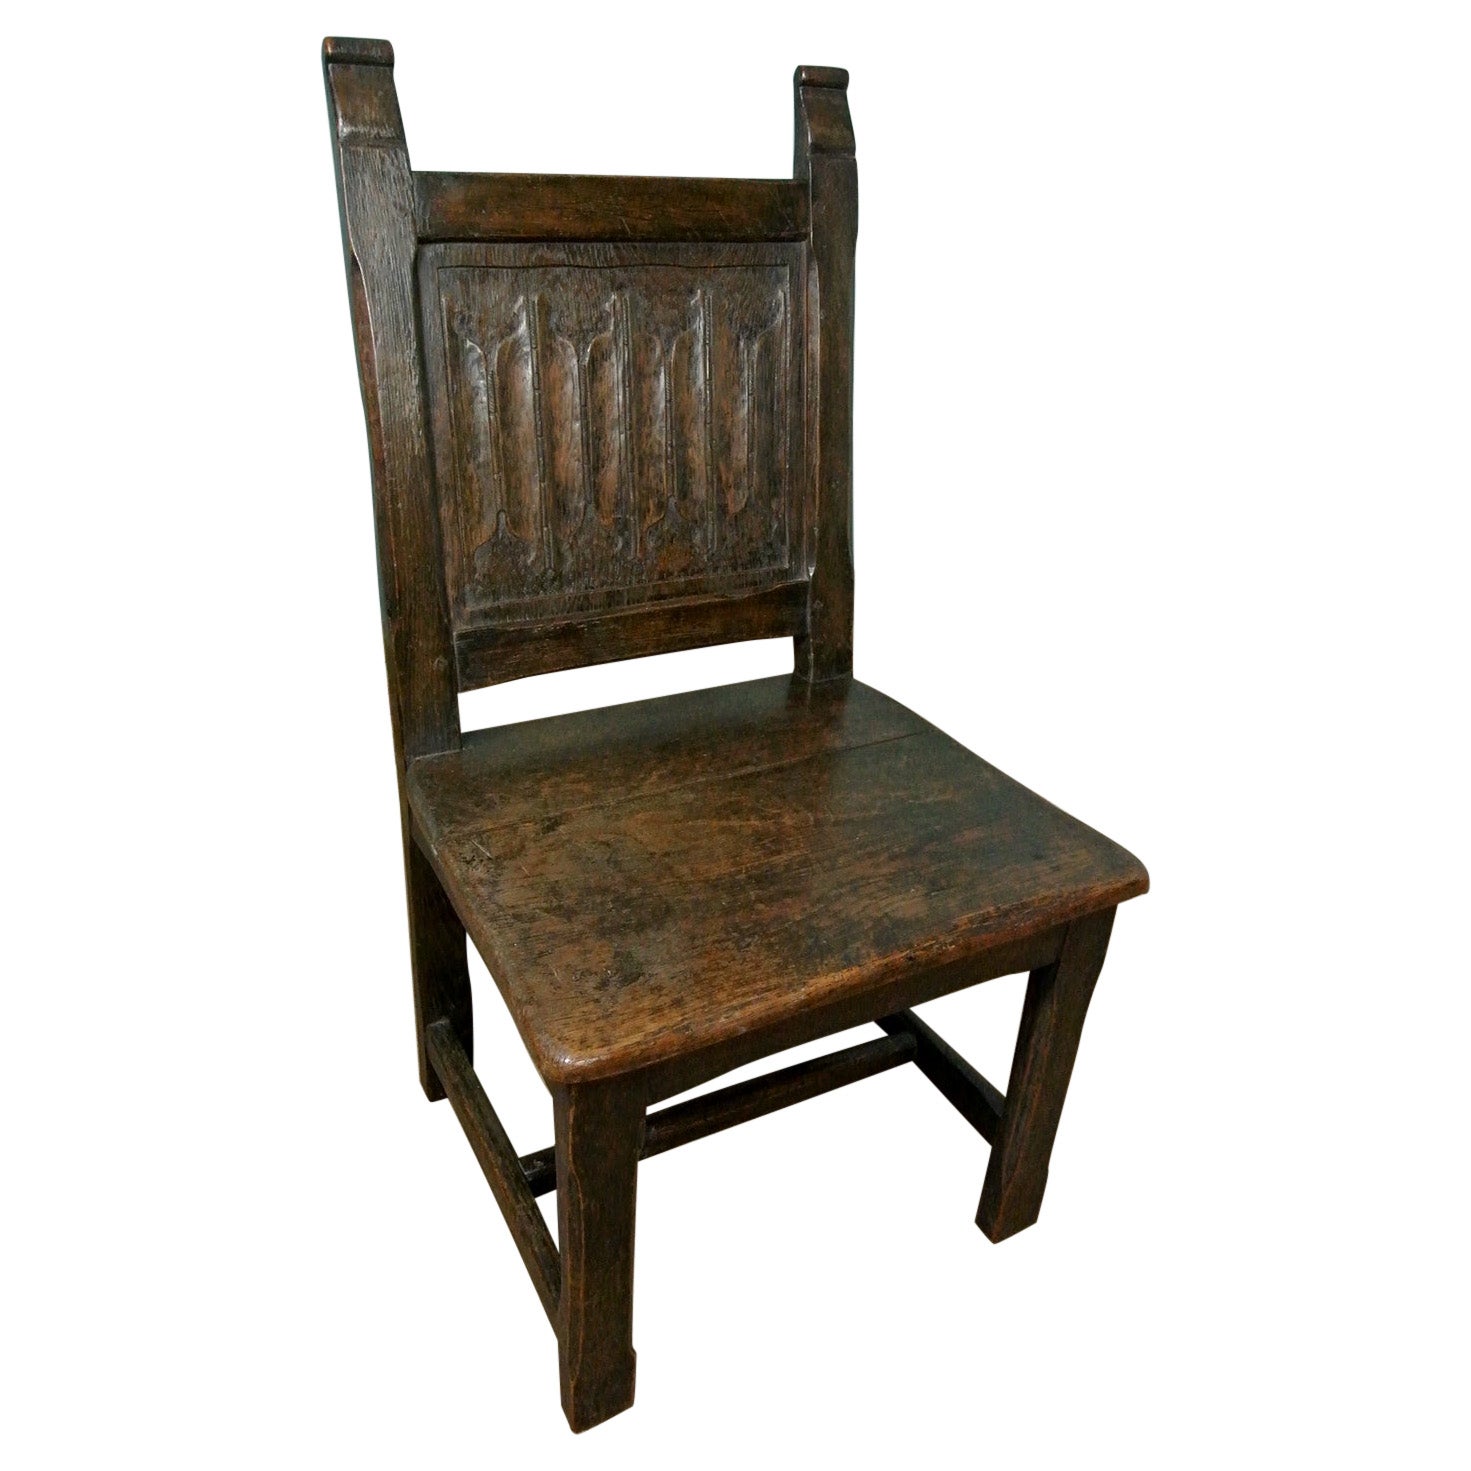 Charles I Oak Chair with Linen Fold Back Panel c.1640